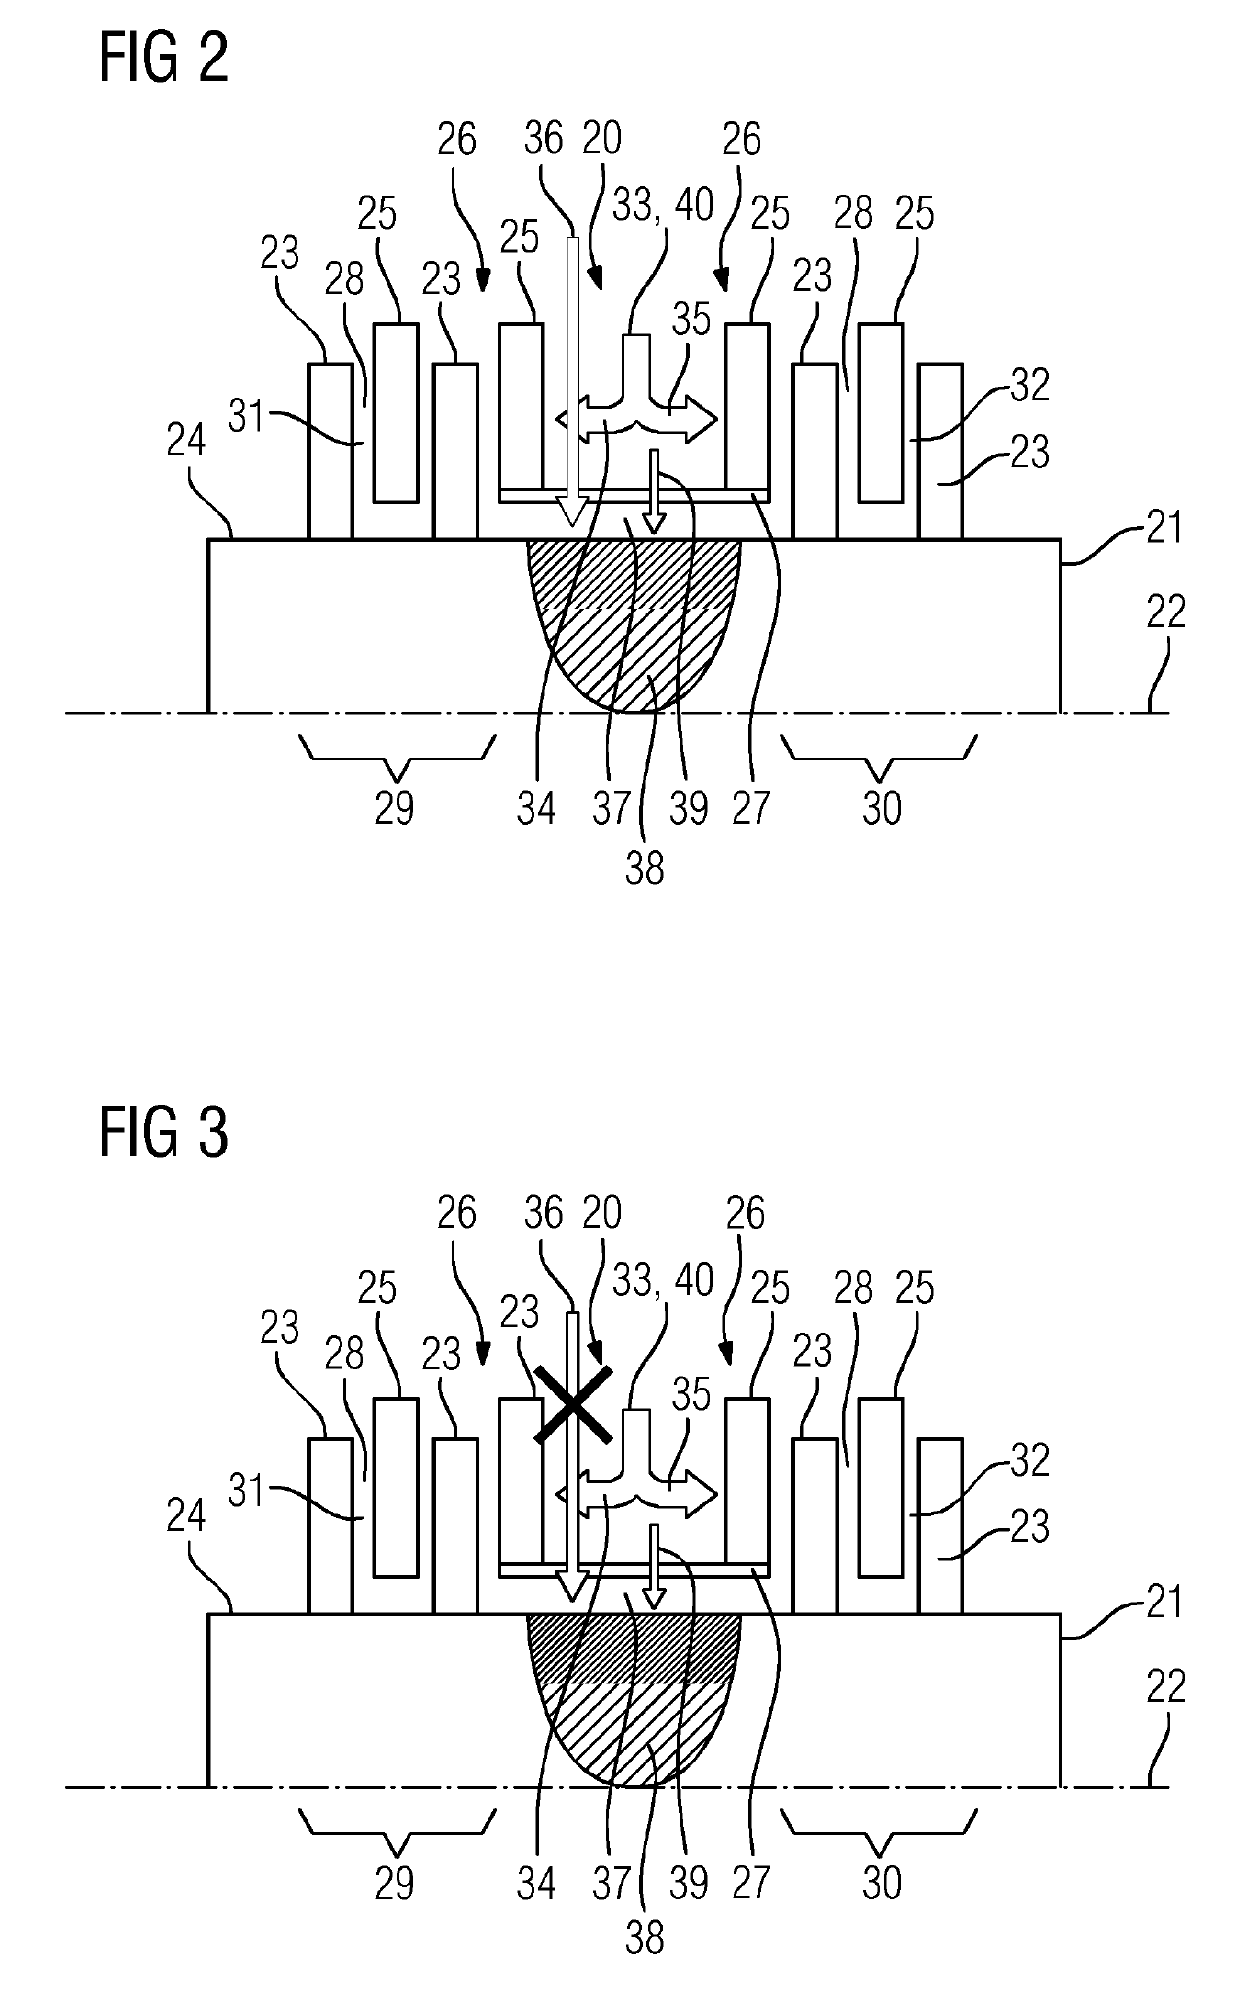 Controlled cooling of turbine shafts